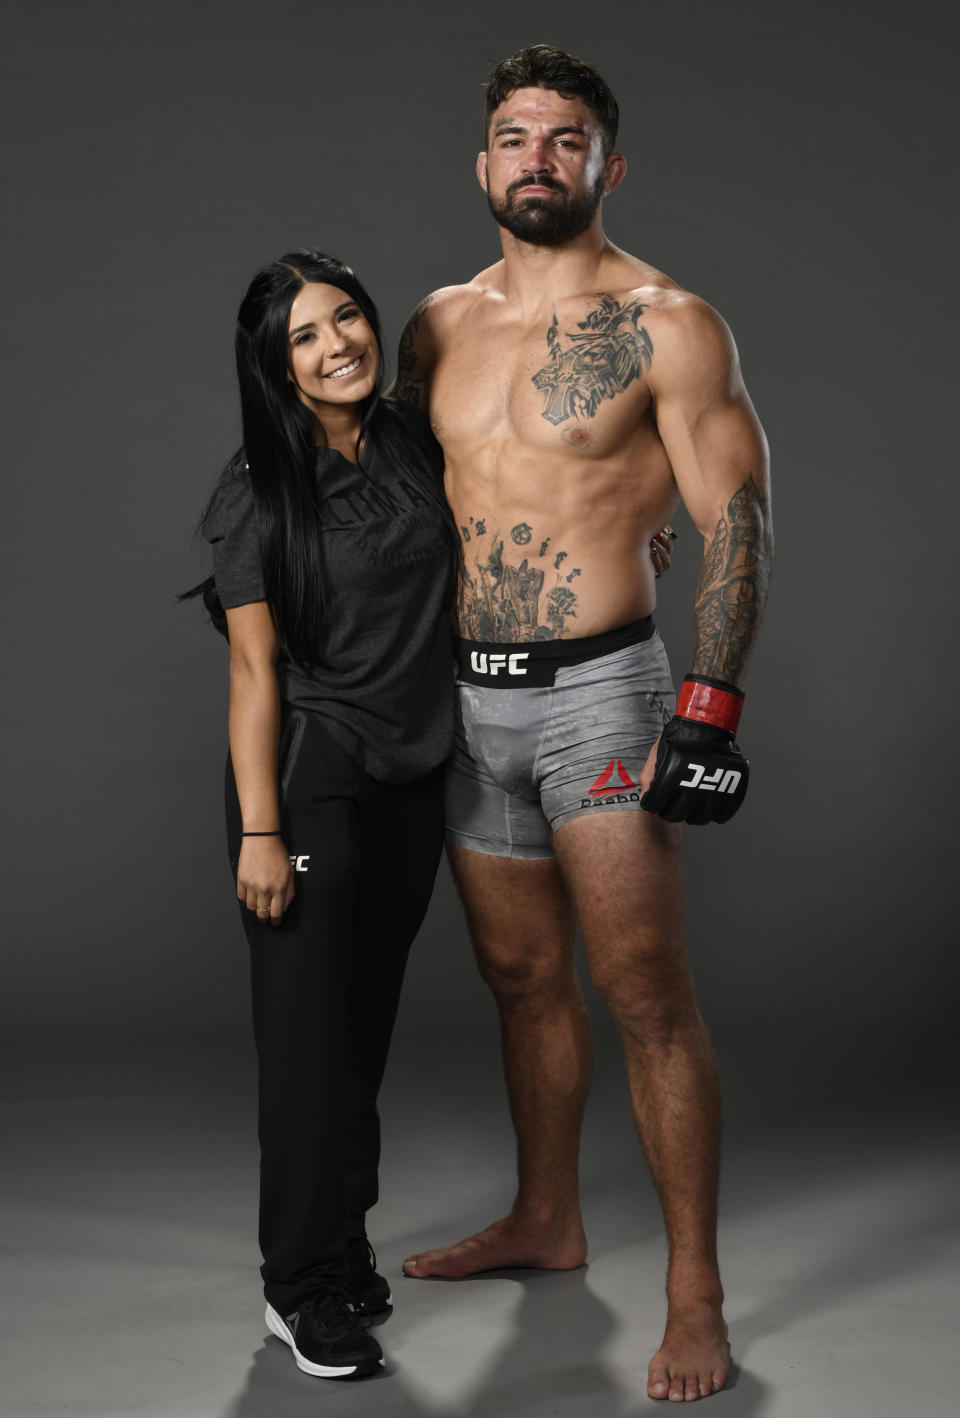 LAS VEGAS, NEVADA - JUNE 27: Mike Perry poses for a portrait backstage with his girlfriend Latory Gonzalez after his victory during the UFC Fight Night event at UFC APEX on June 27, 2020 in Las Vegas, Nevada. (Photo by Mike Roach/Zuffa LLC)